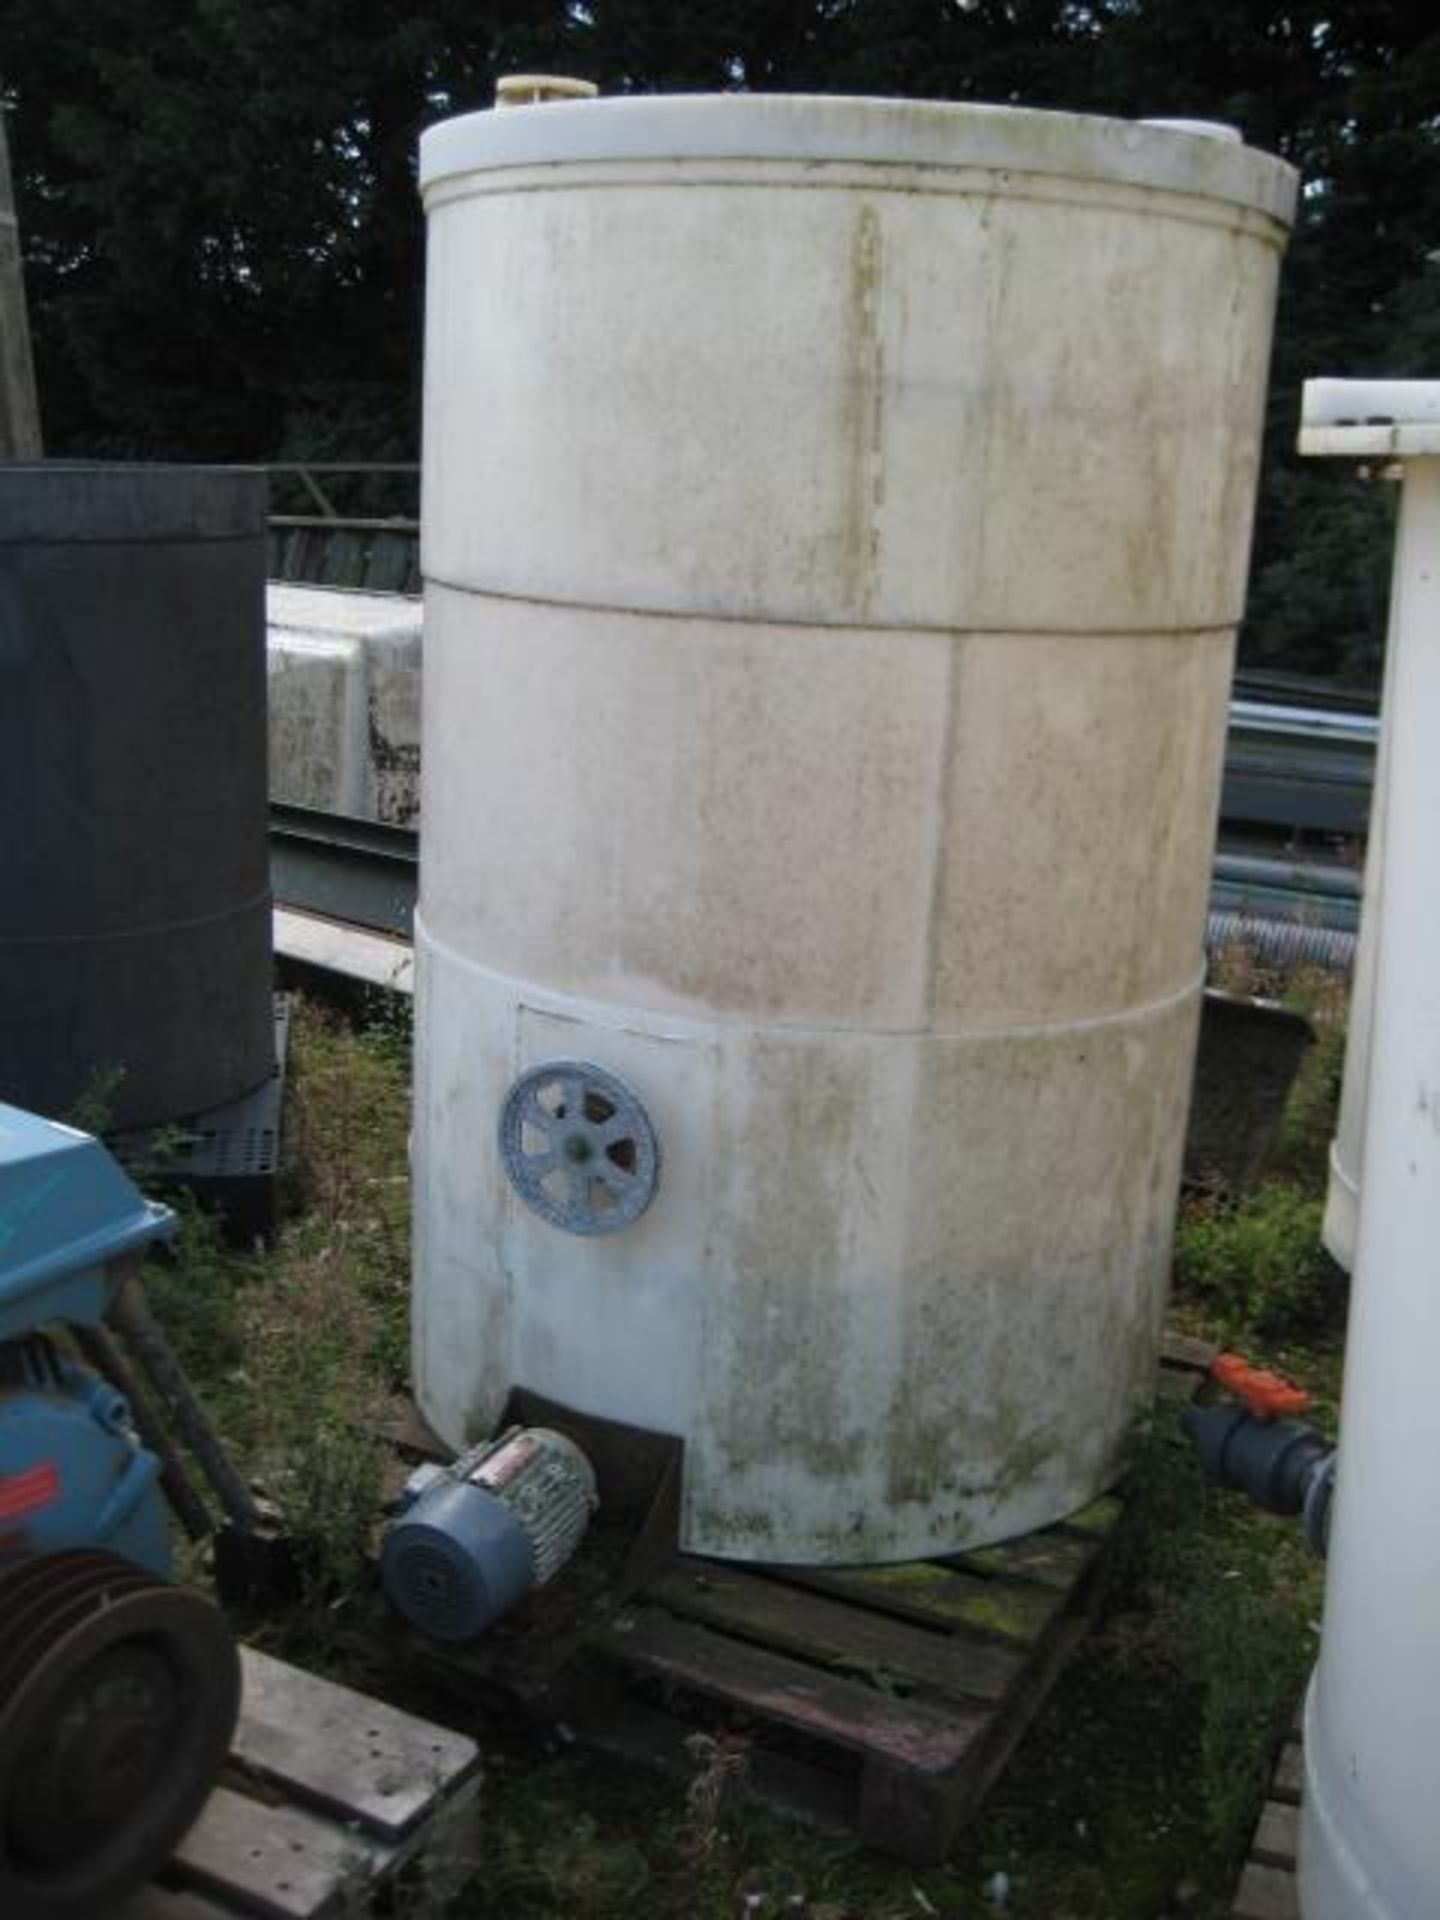 Circular Plastic Tank, approx. 1100mm dia. x 1700mm high, with top cover, internal agitator and